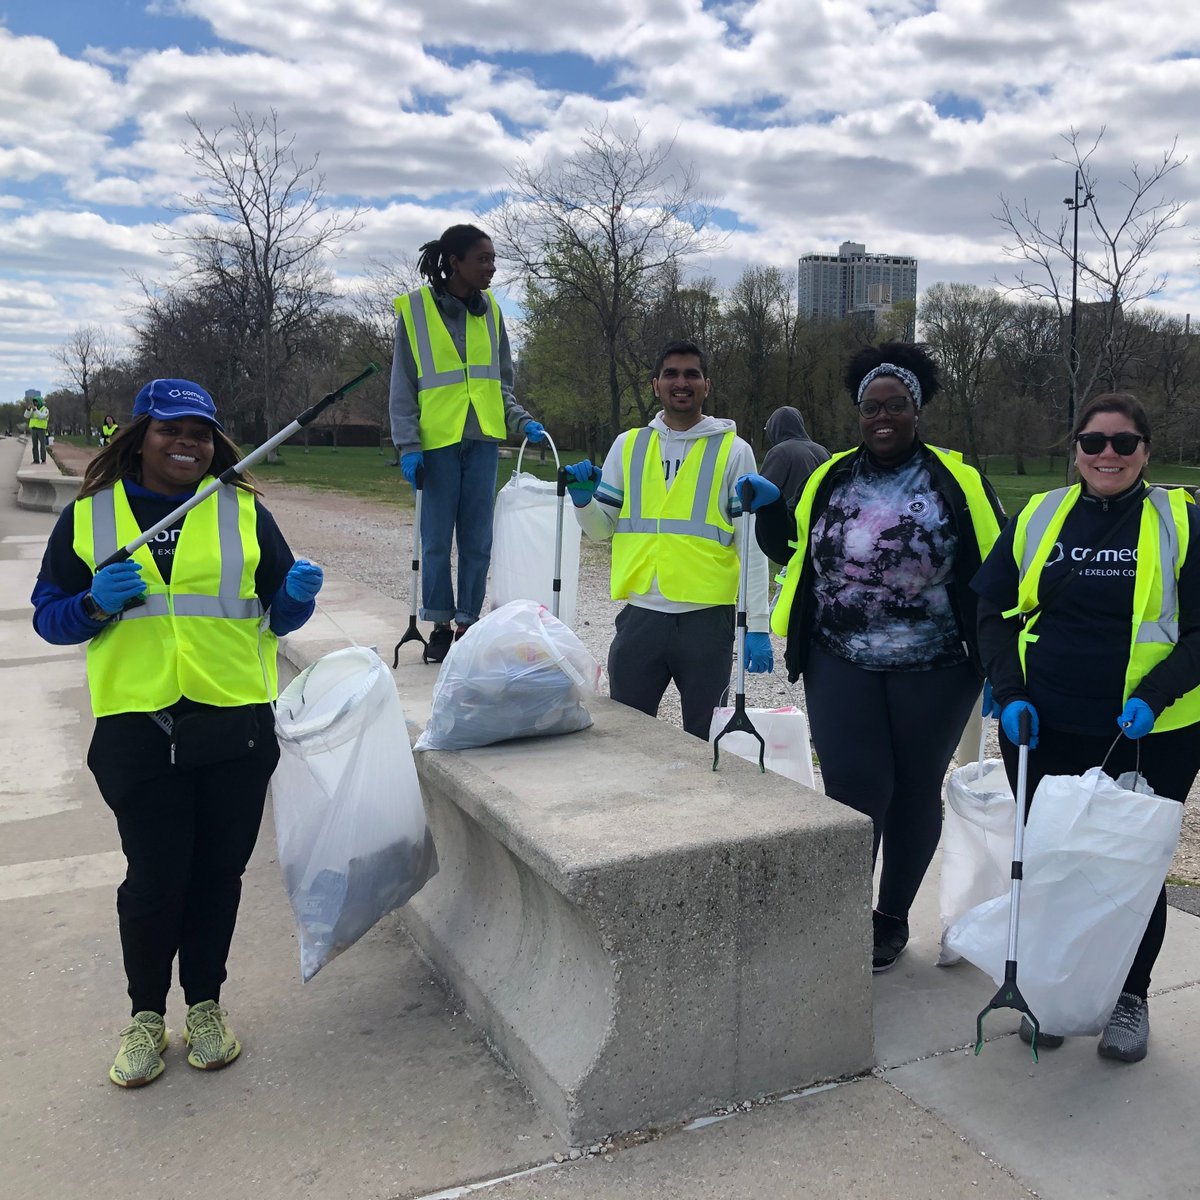 As an @Exelon Impact Leader, Traci, our work planner, makes every month #NationalVolunteerMonth. She's led multiple events throughout #OurCommunities, including a beach clean-up, a plastic bag recycling drive & joining fellow #ComEdVolunteers at a food pantry – just in April!